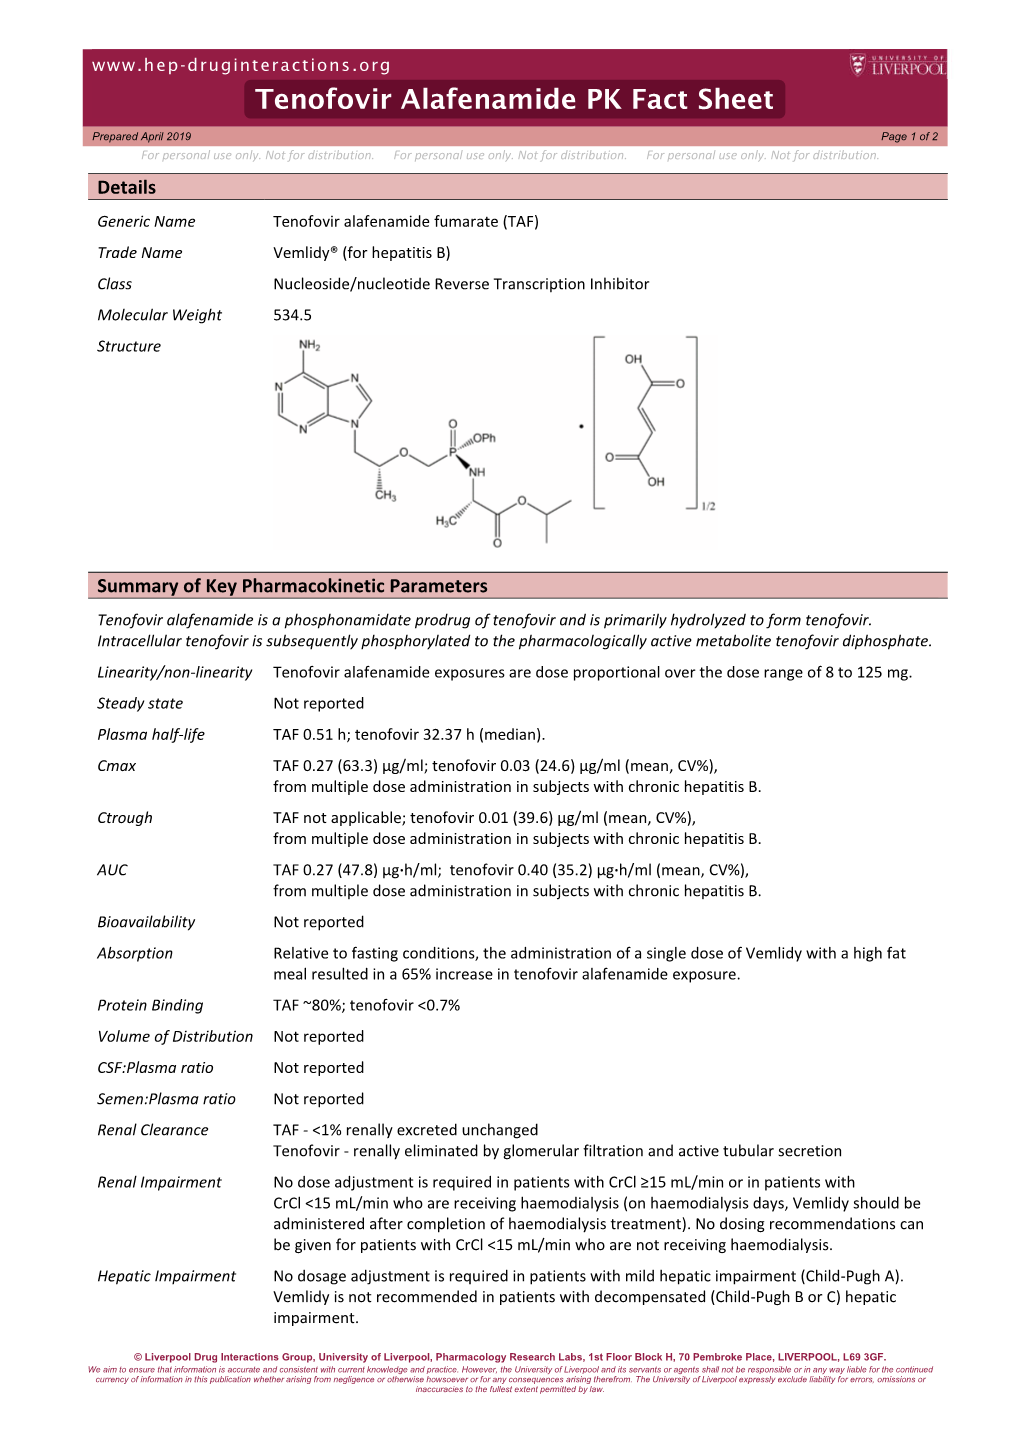 Tenofovir Alafenamide PK Fact Sheet Prepared April 2019 Page 1 of 2 for Personal Use Only